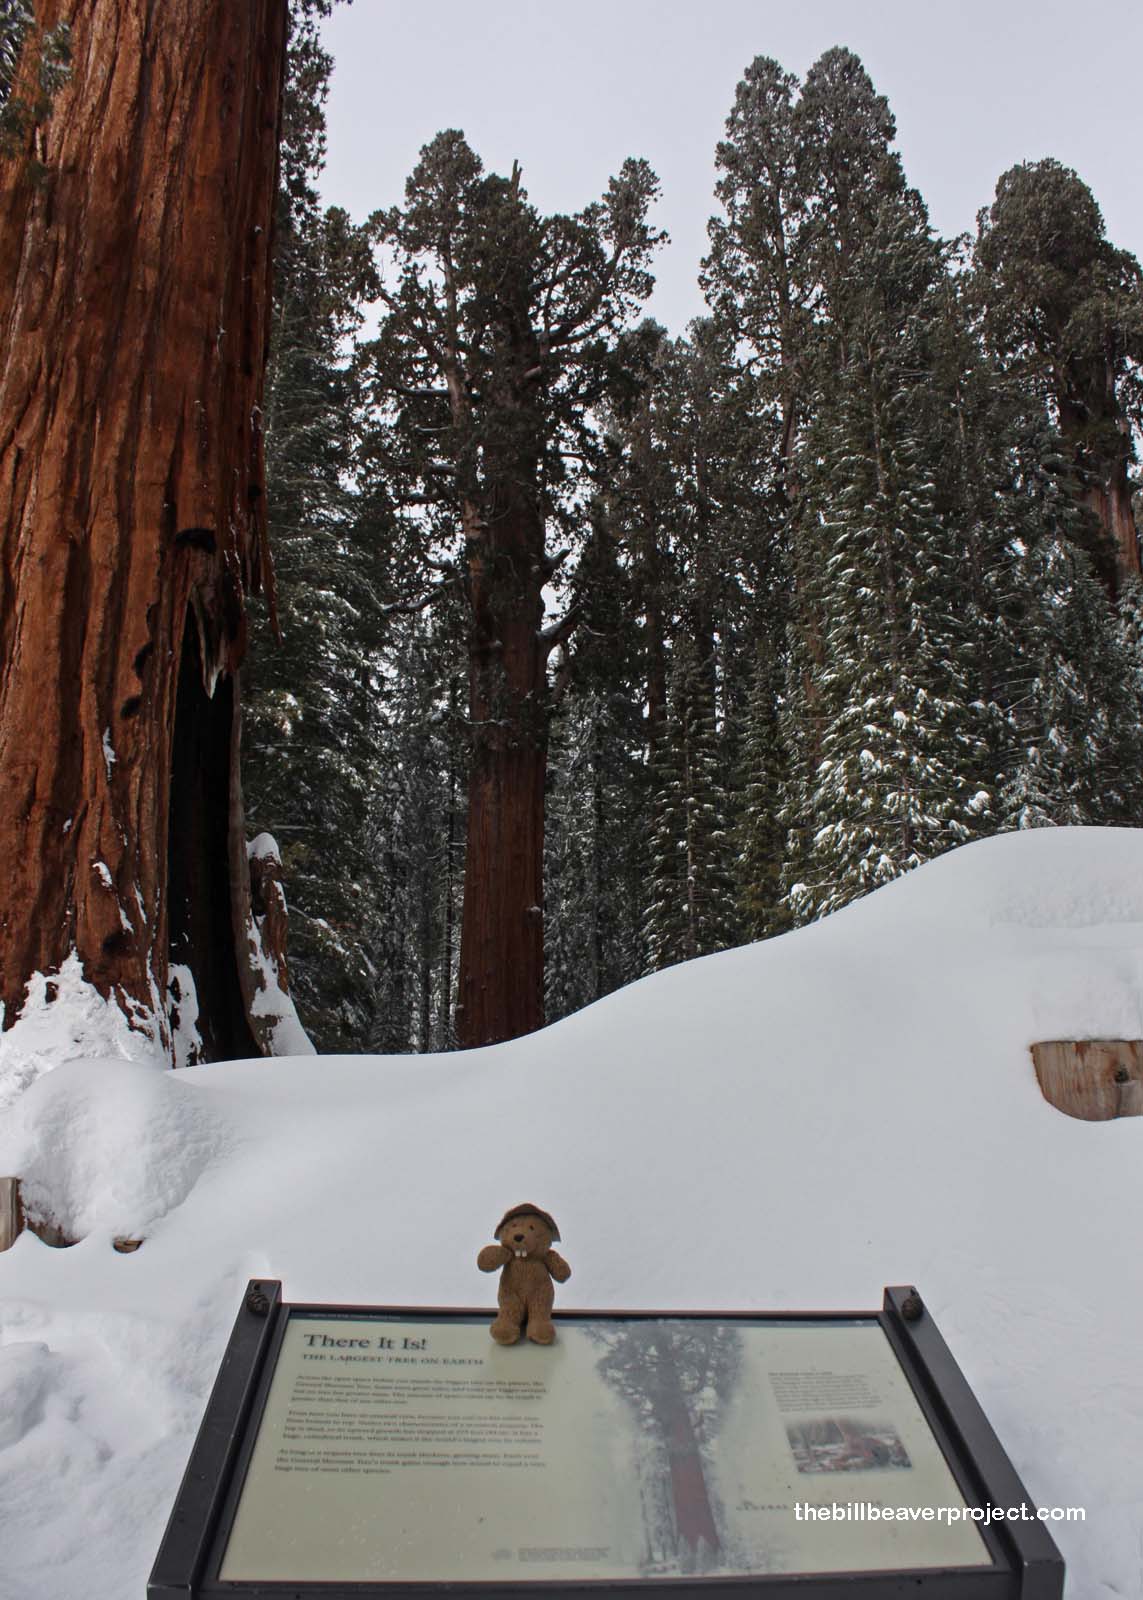 The mighty General Sherman Tree!